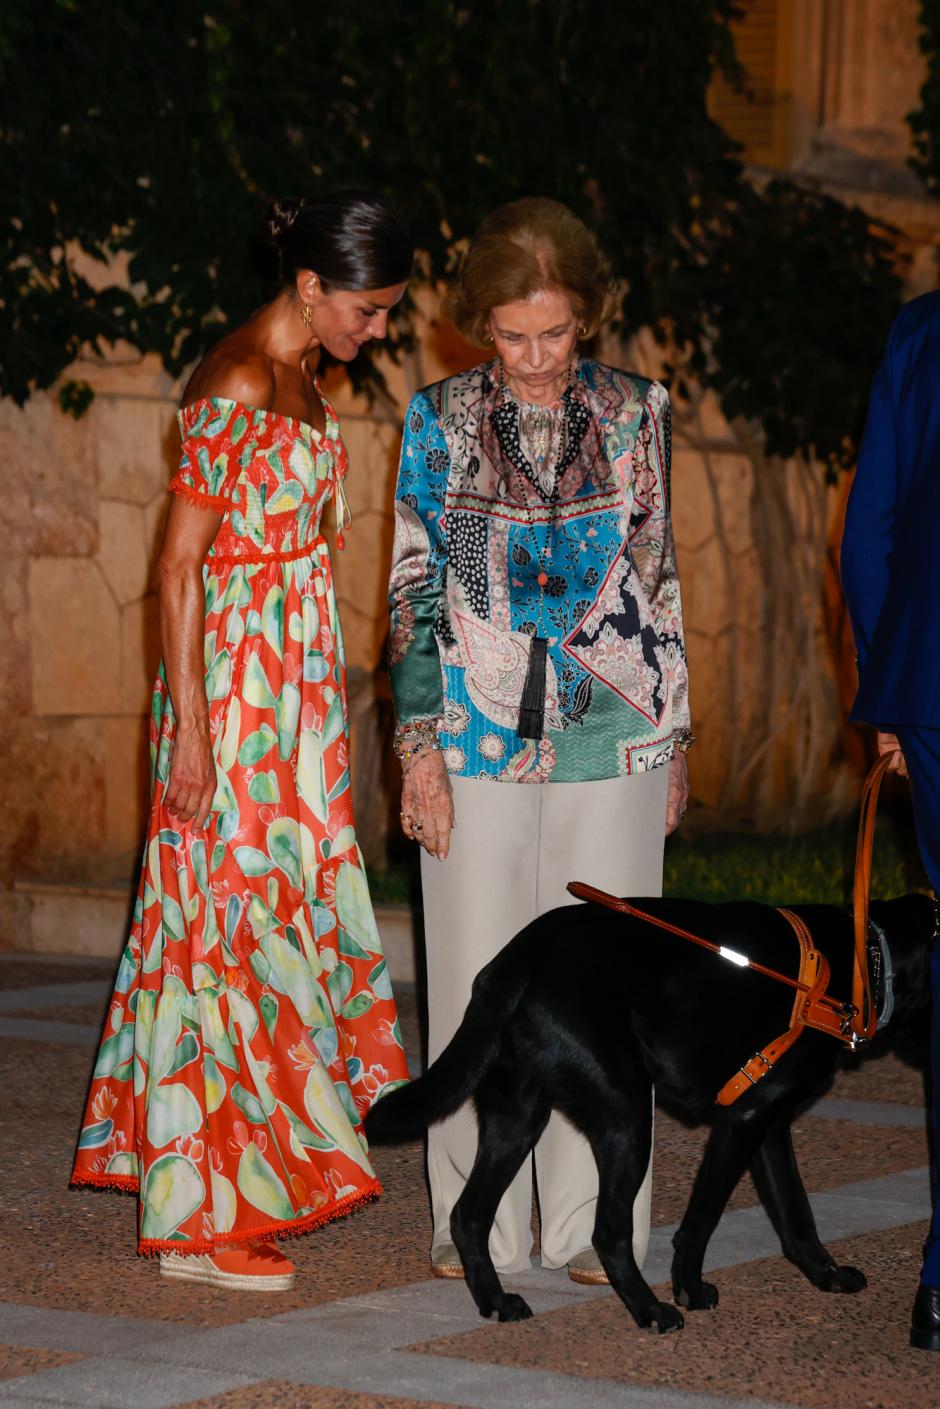 Spanish King Felipe and Queen Letizia Ortiz with Emeritus Queen Sofia during a reception at the Marivent Palace in Palma de Mallorca on Thursday 4 August 2022